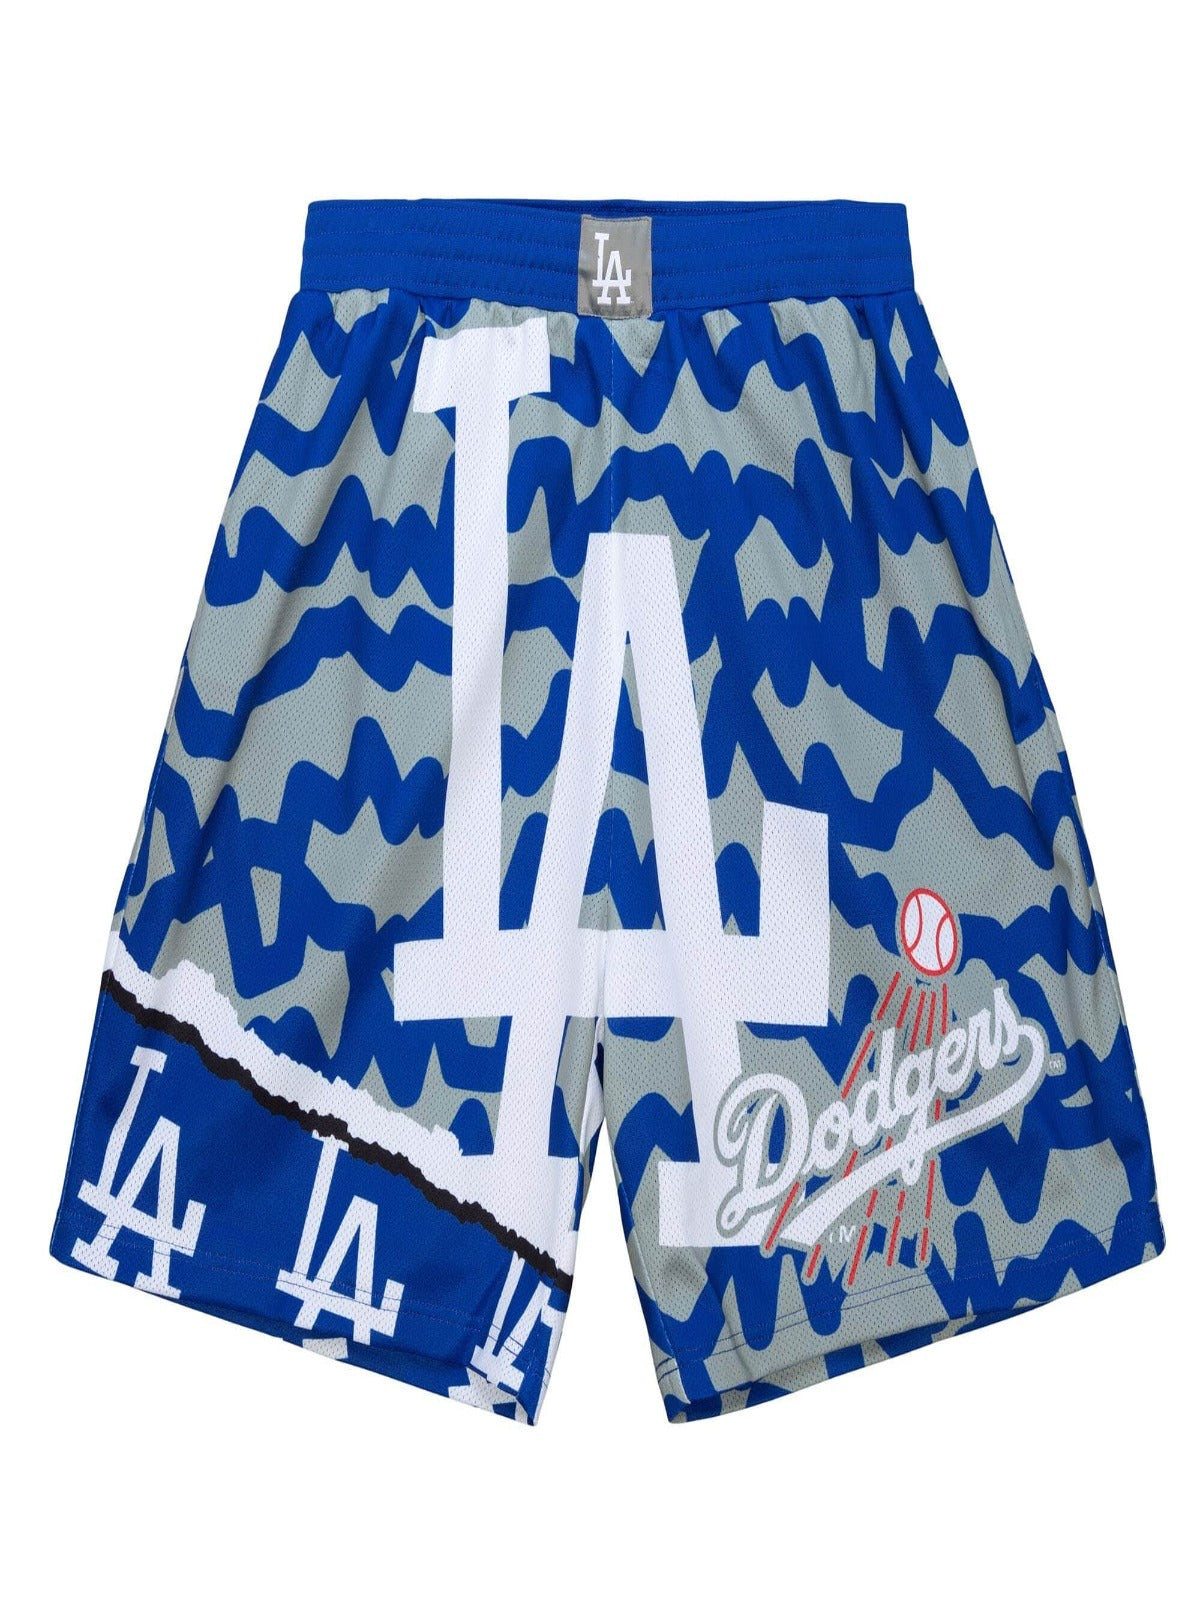 Mitchell & Ness MLB JUMBOTRON 2.0 Sublimated Shorts Brewers (as1